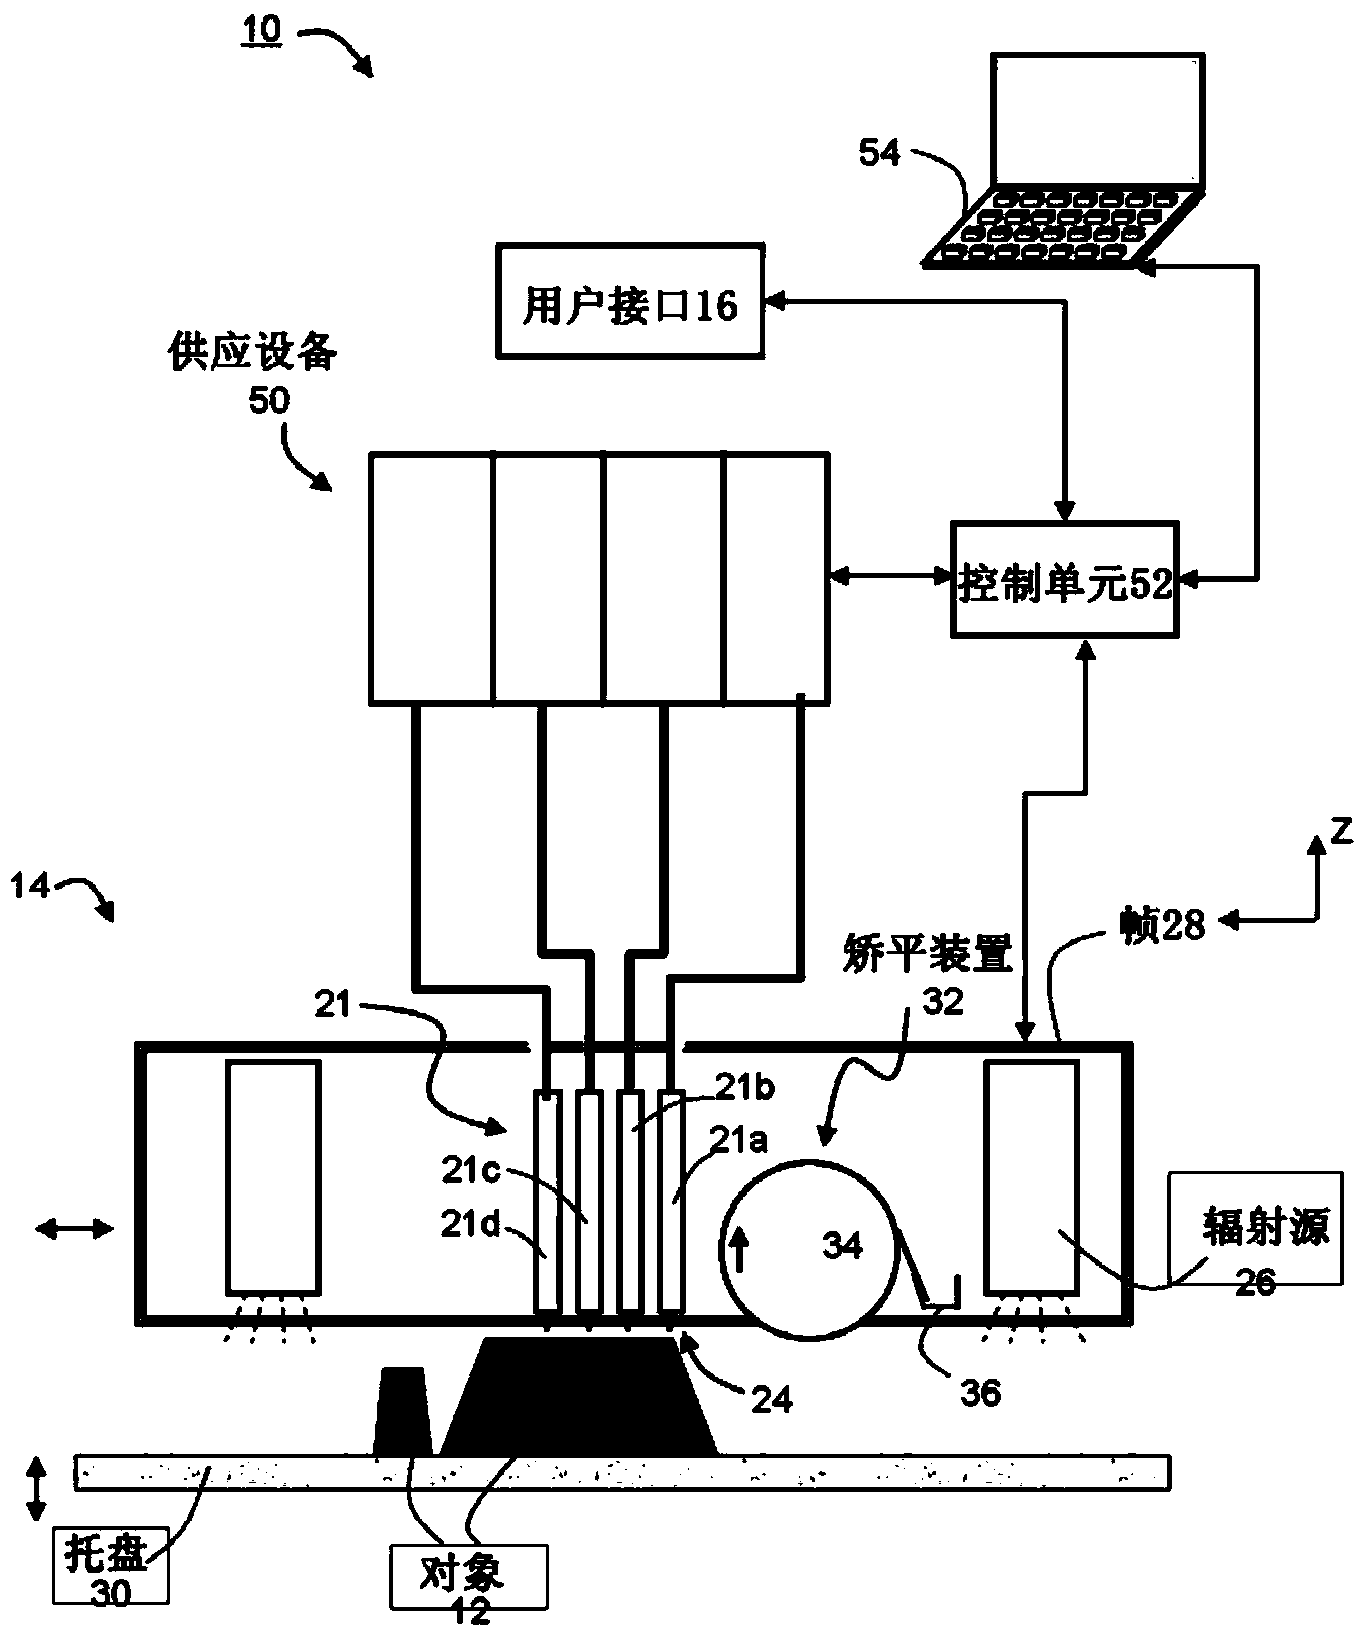 System and method for additive manufacturing of an object